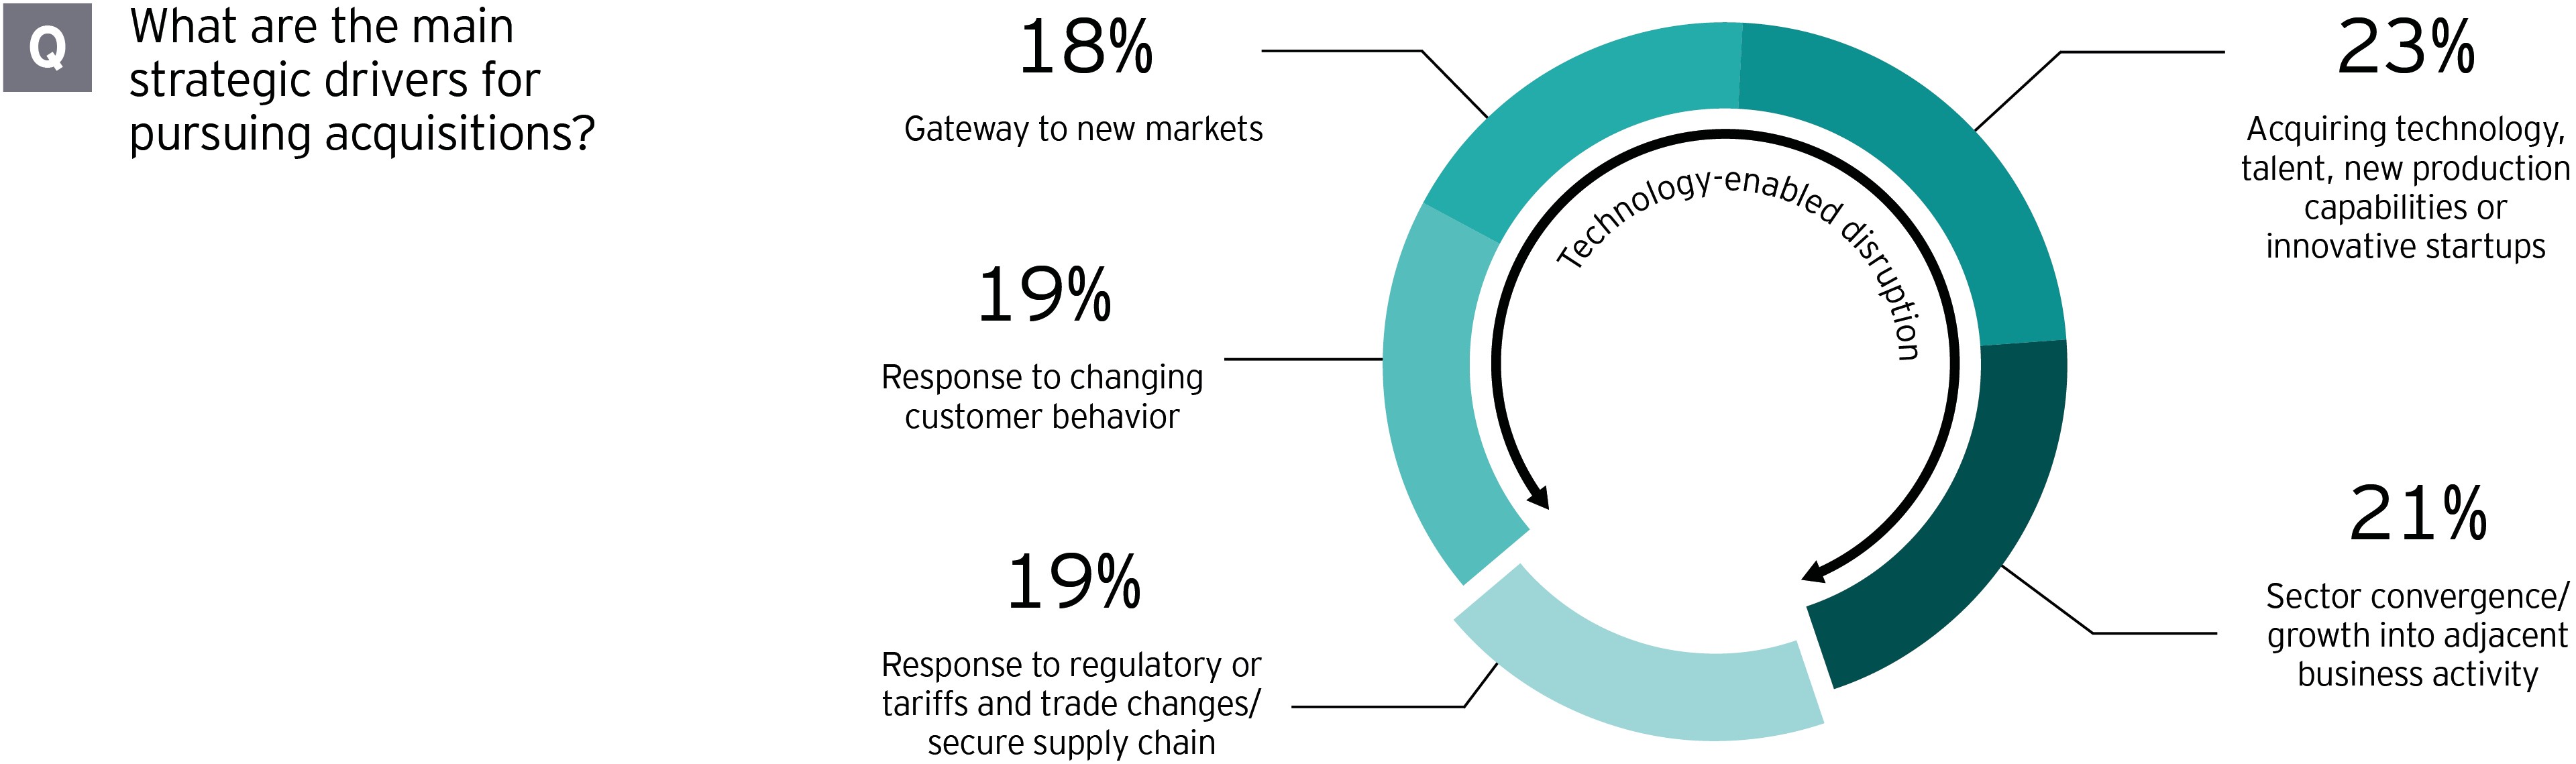 Graphic: What are the main strategic drivers for pursuing acquisitions?